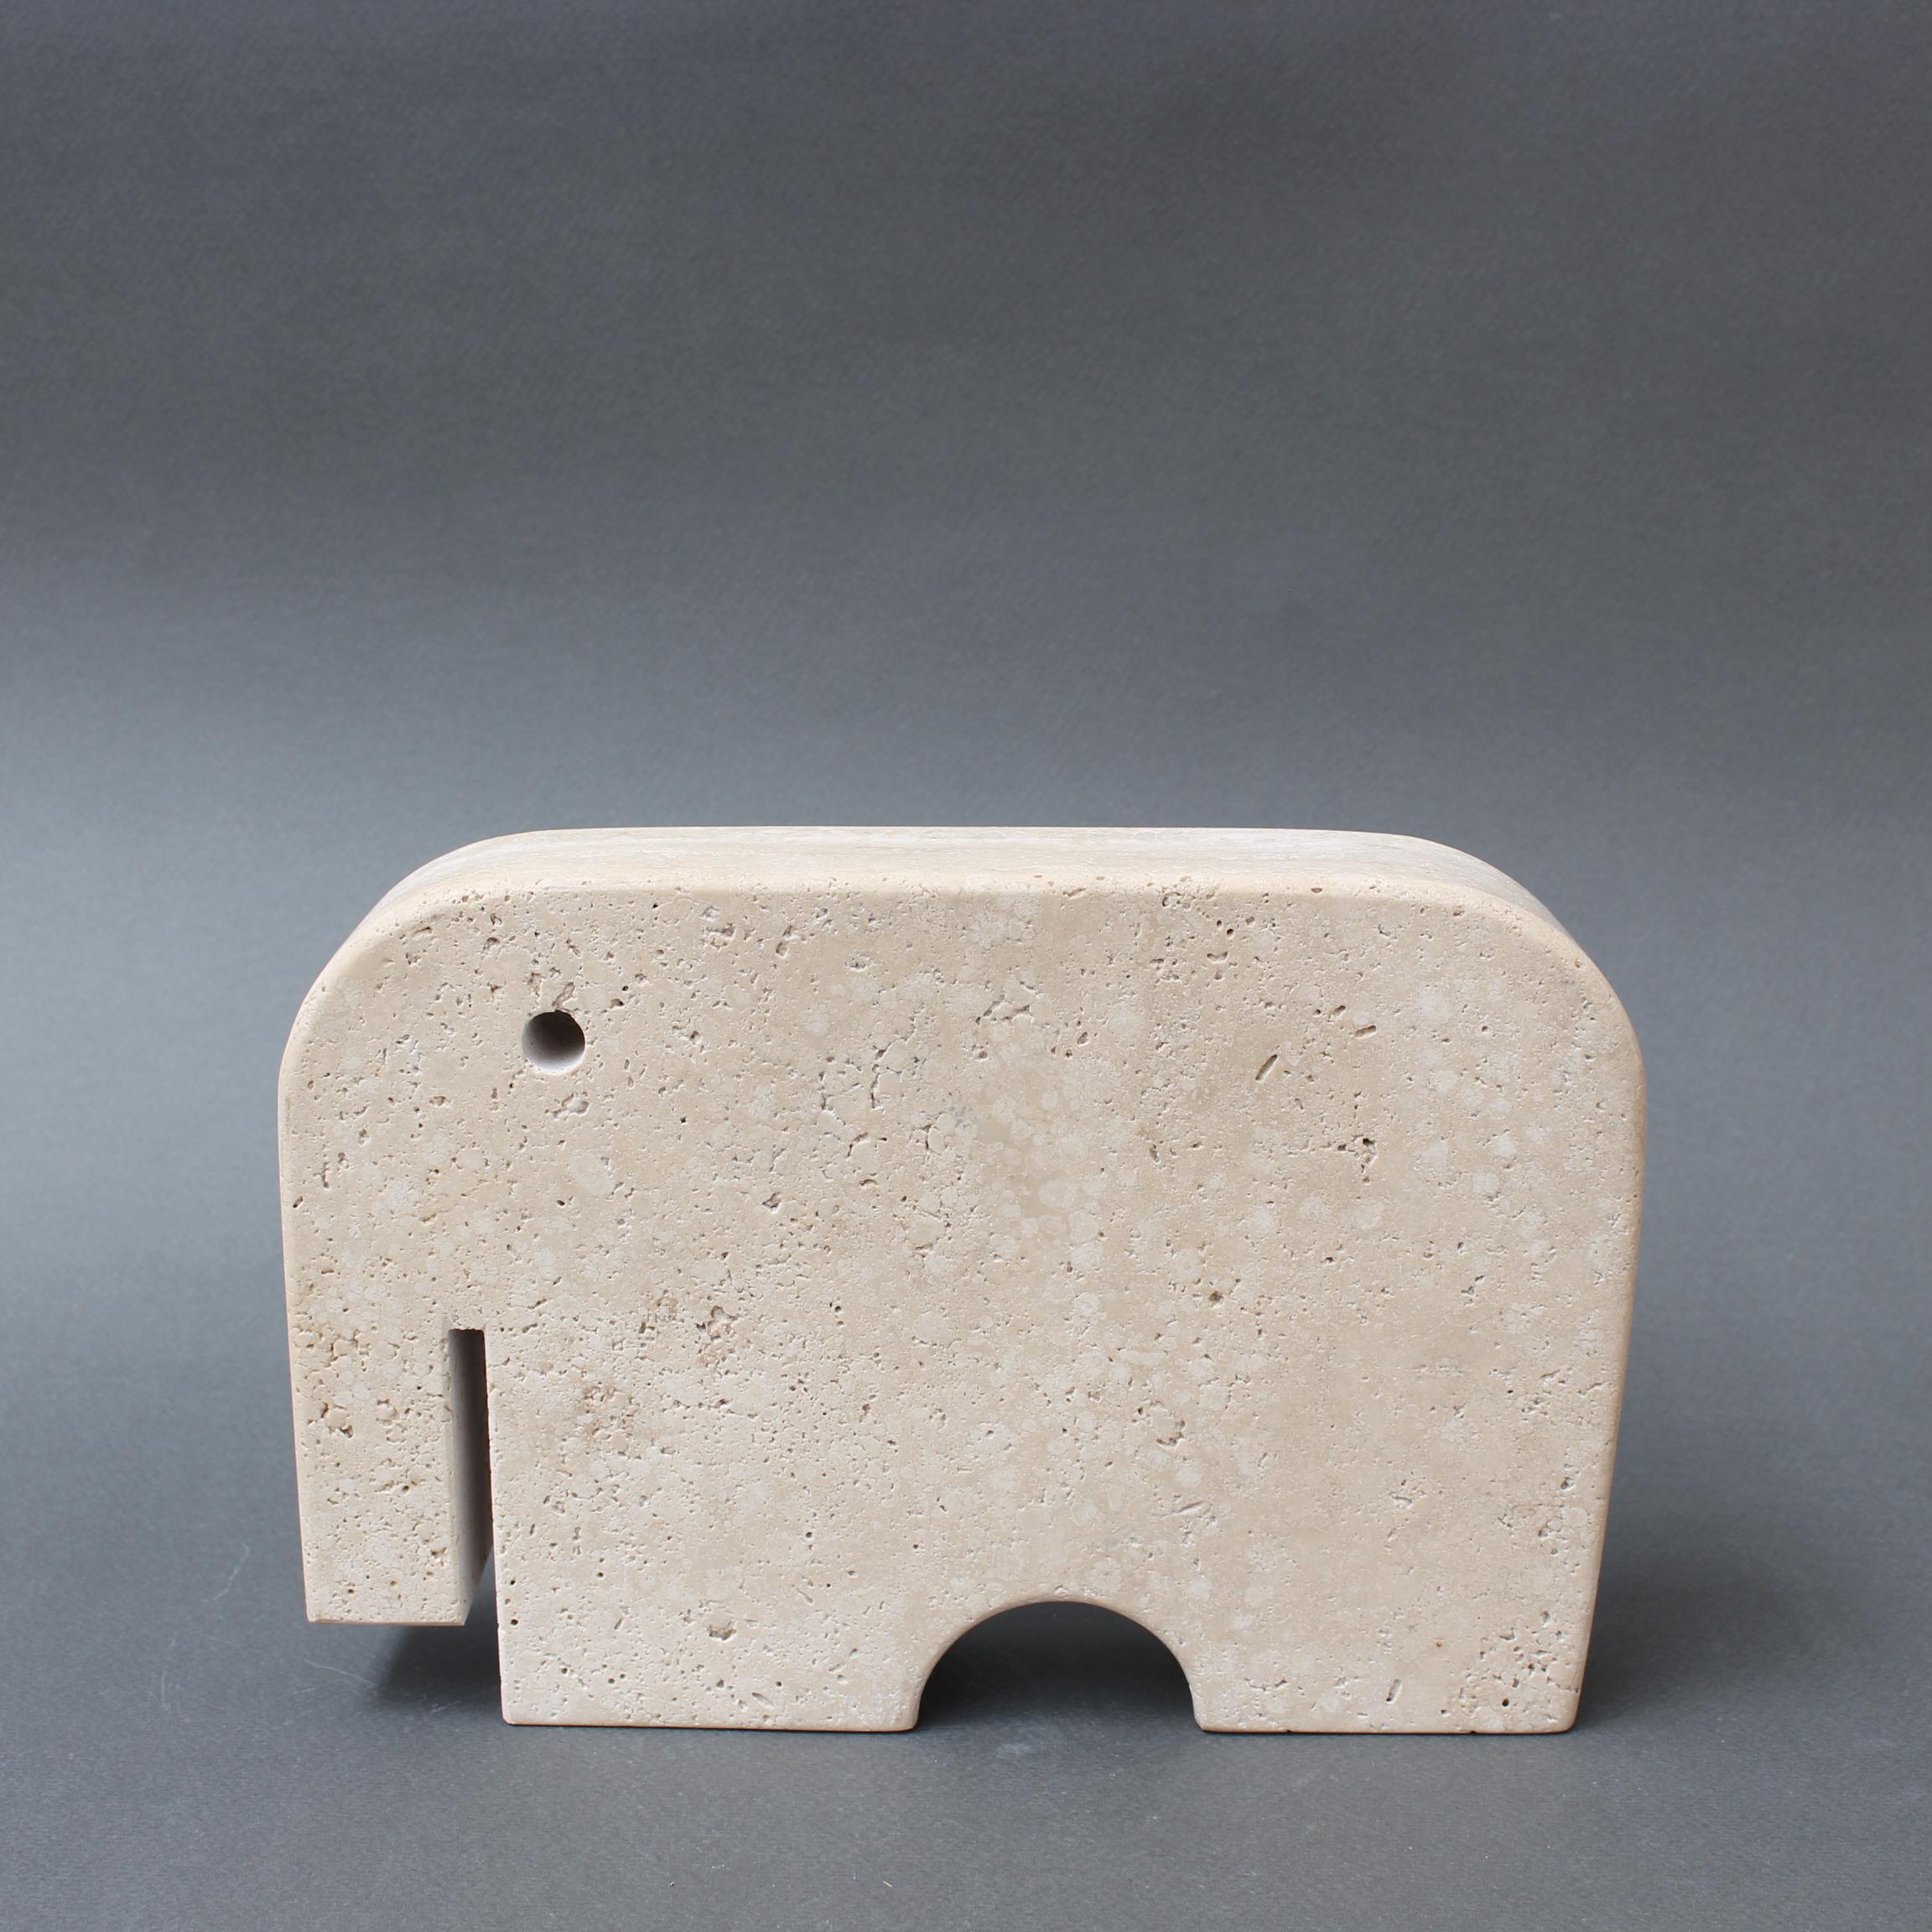 Travertine elephant table sculpture by Mannelli Bros., Florence, Italy (circa 1970s). Joyful travertine stylised elephant will delight art lovers and collectors. Minimalist in style with soft curves and lines. Very weighty (3.4 kg / 7.5 lbs) and